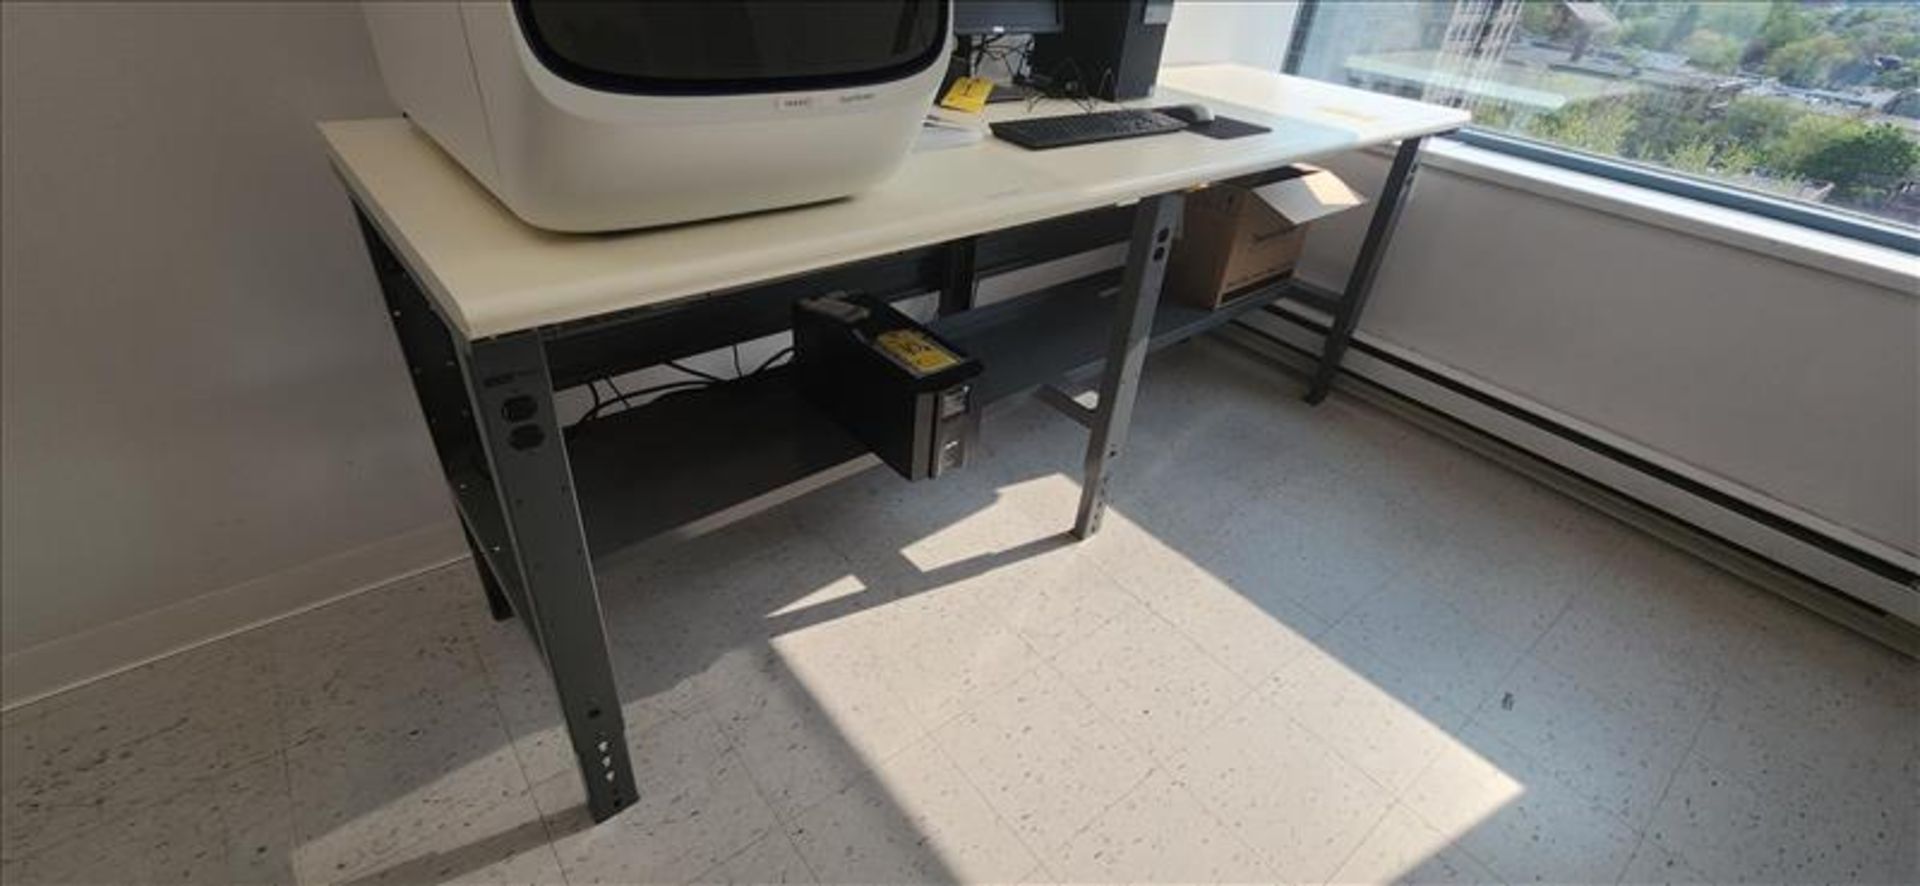 Uline Work Bench approx. 30 in. x 48 in.